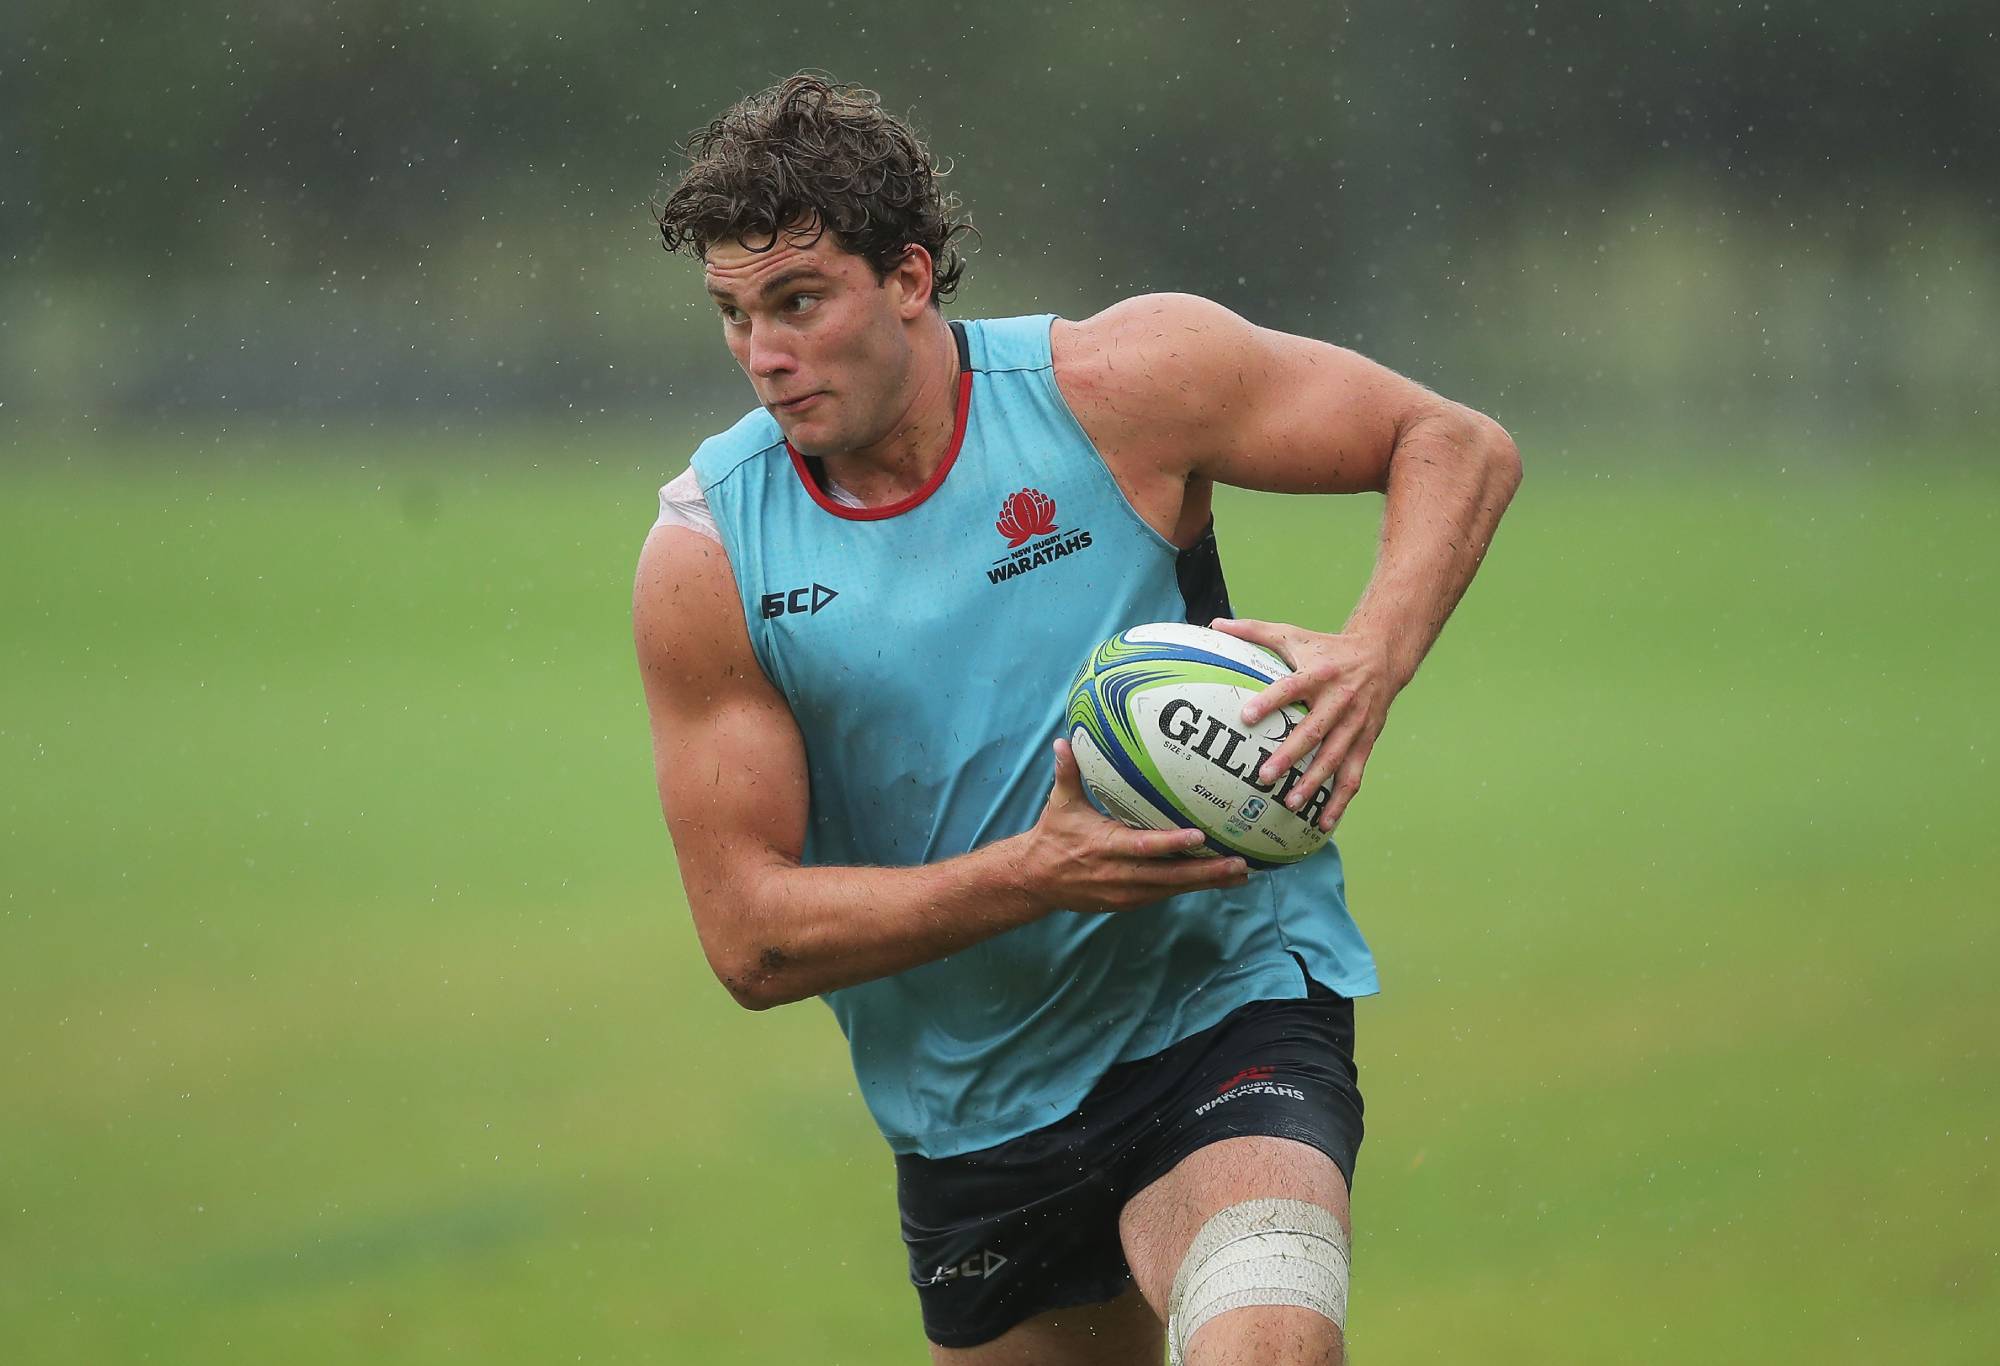 Will Harris runs with the ball during a NSW Waratahs training session at the David Phillips Sports Complex on March 23, 2021 in Sydney, Australia. (Photo by Matt King/Getty Images)